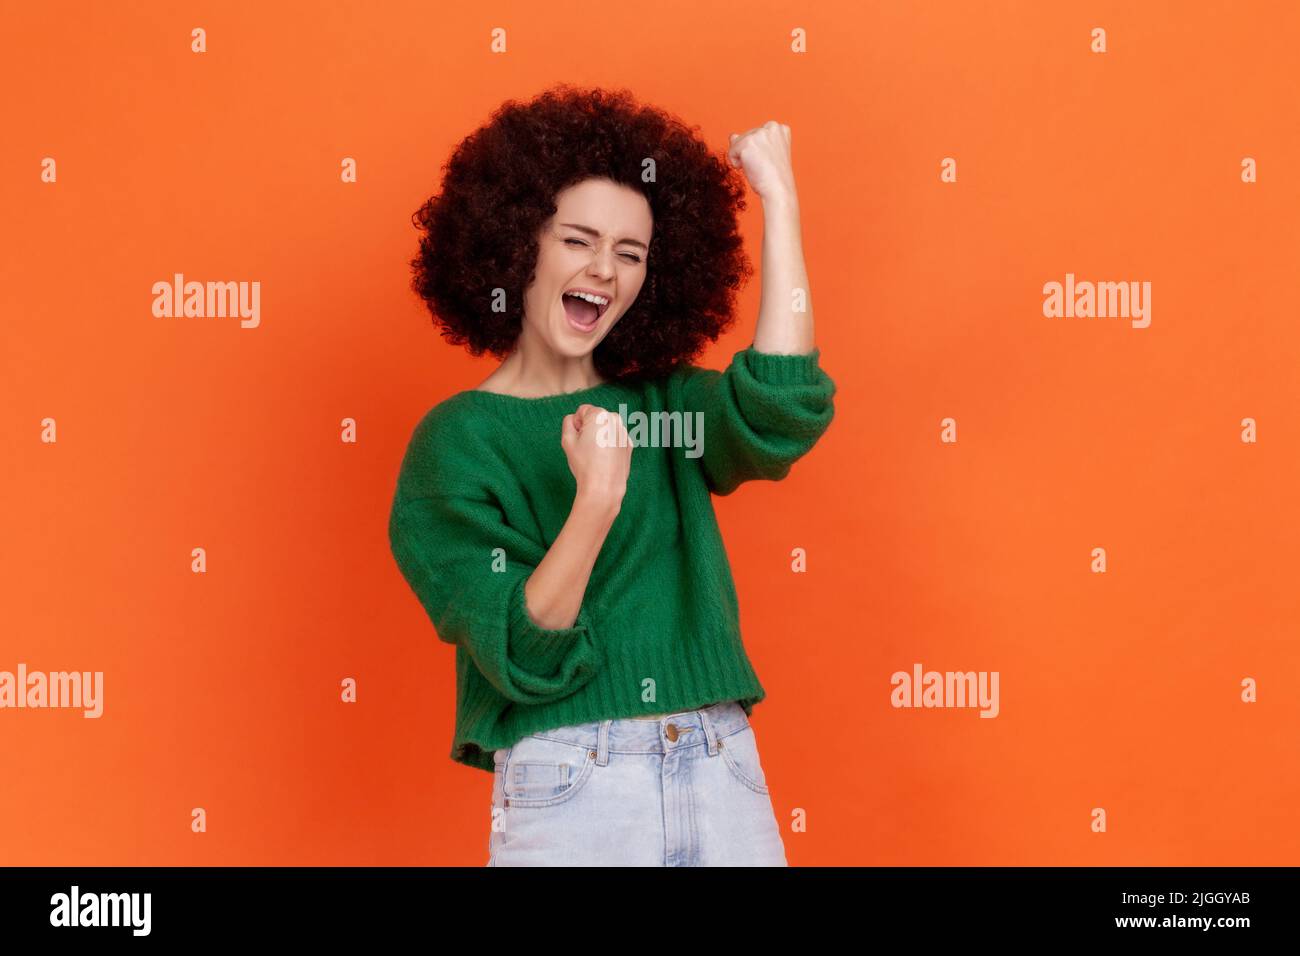 Portrait of happy excited woman with Afro hairstyle wearing green casual style sweater celebrating her winning, clenched fists, yelling. Indoor studio shot isolated on orange background. Stock Photo